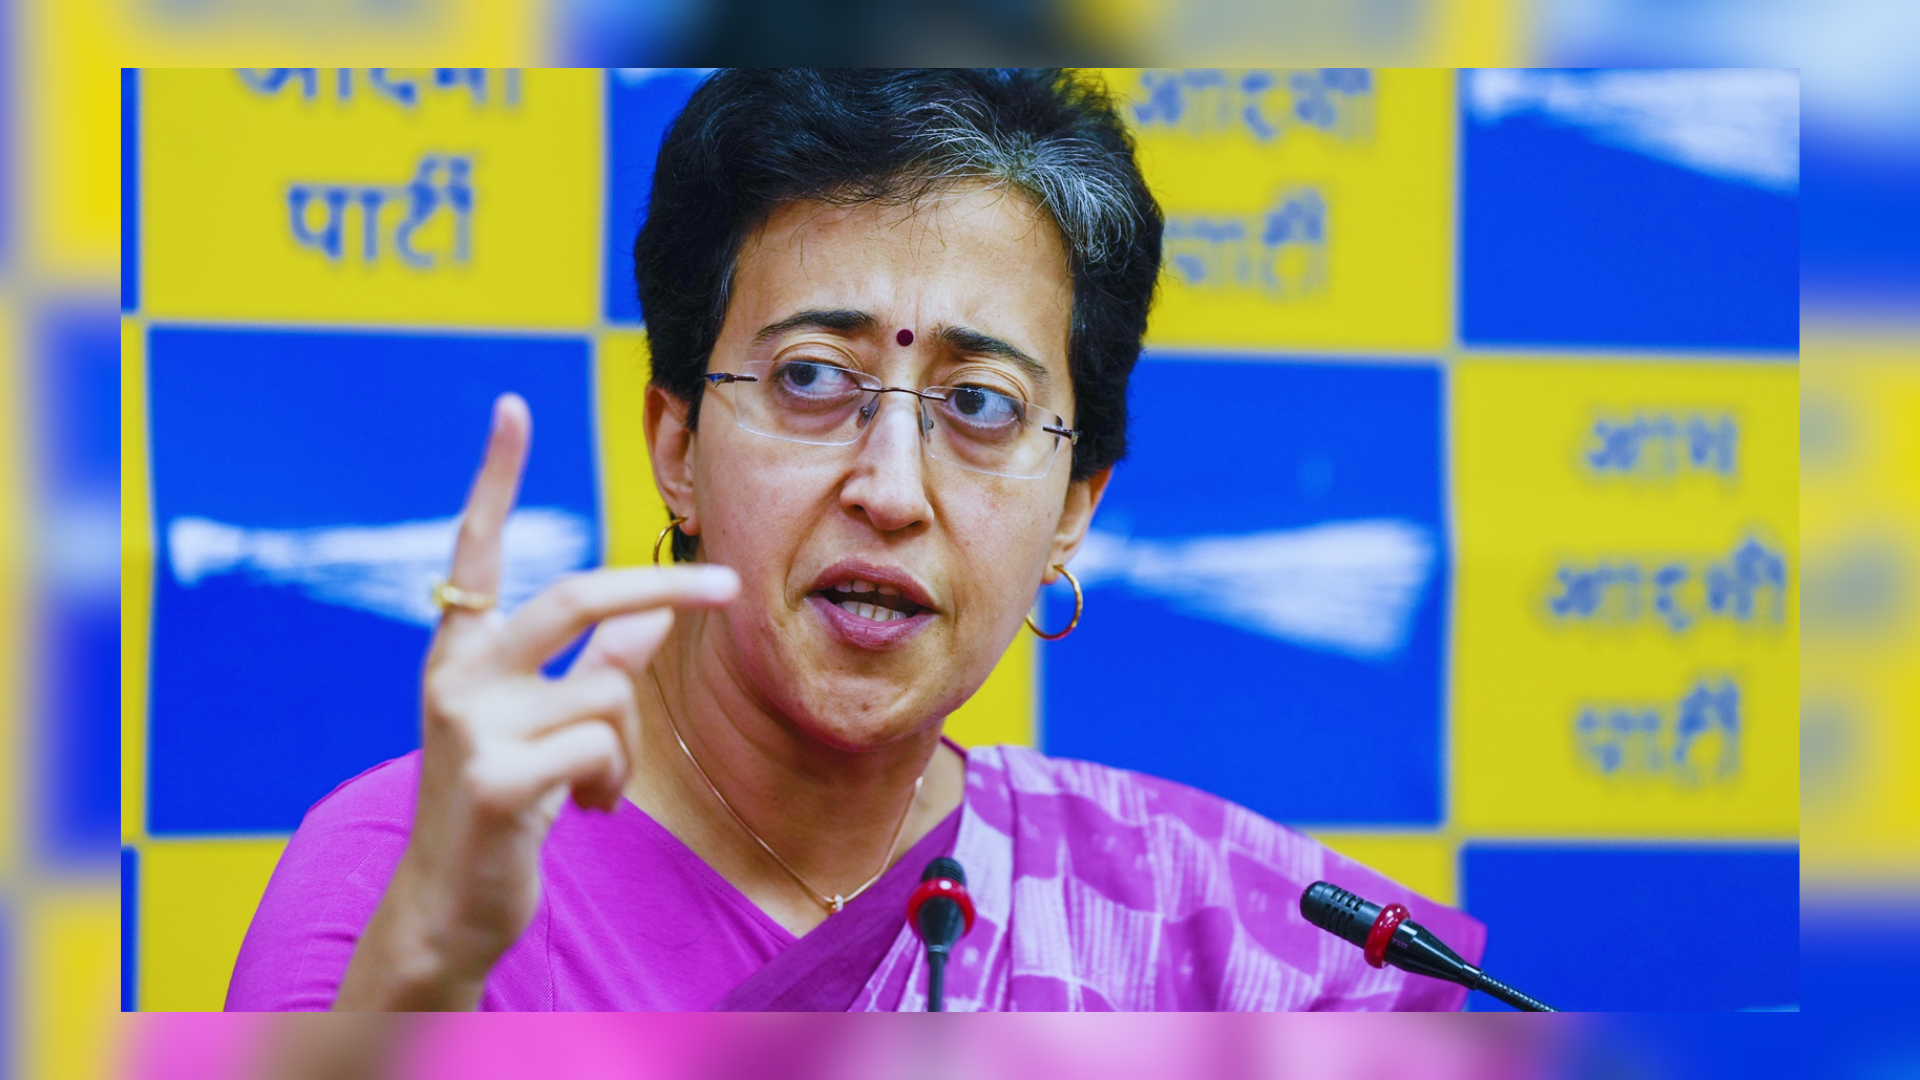 Delhi Water Minister Atishi To Begin ‘Indefinite Fast’ Amid Rising Water Crisis: ‘To Fight Against Injustice, One Must Adopt the Path of Satyagraha’